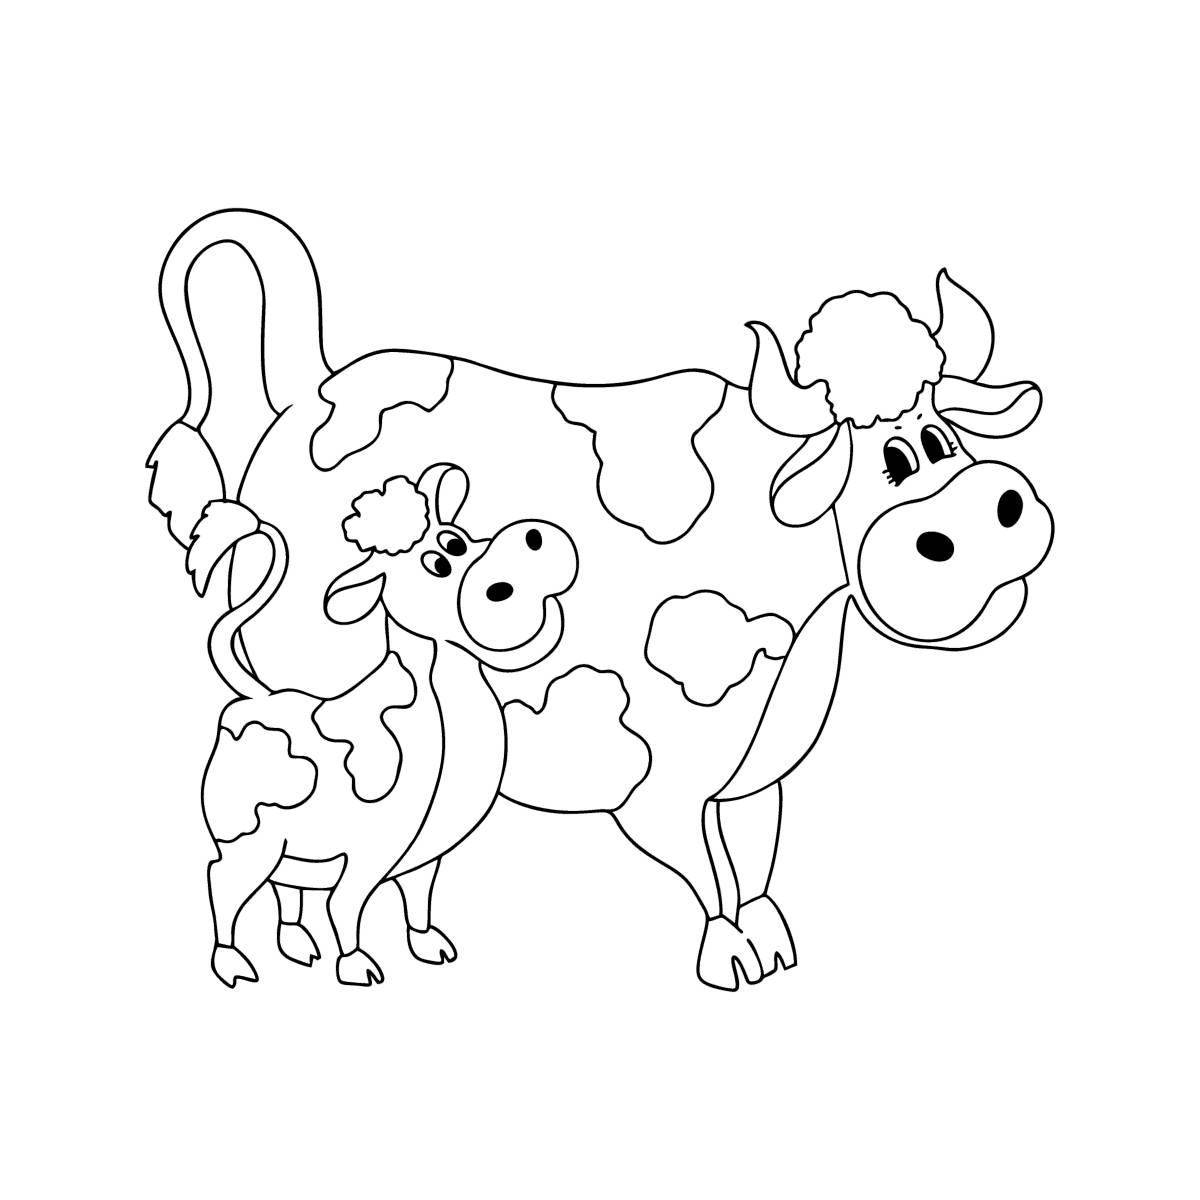 Colorful cow coloring page for 4-5 year olds